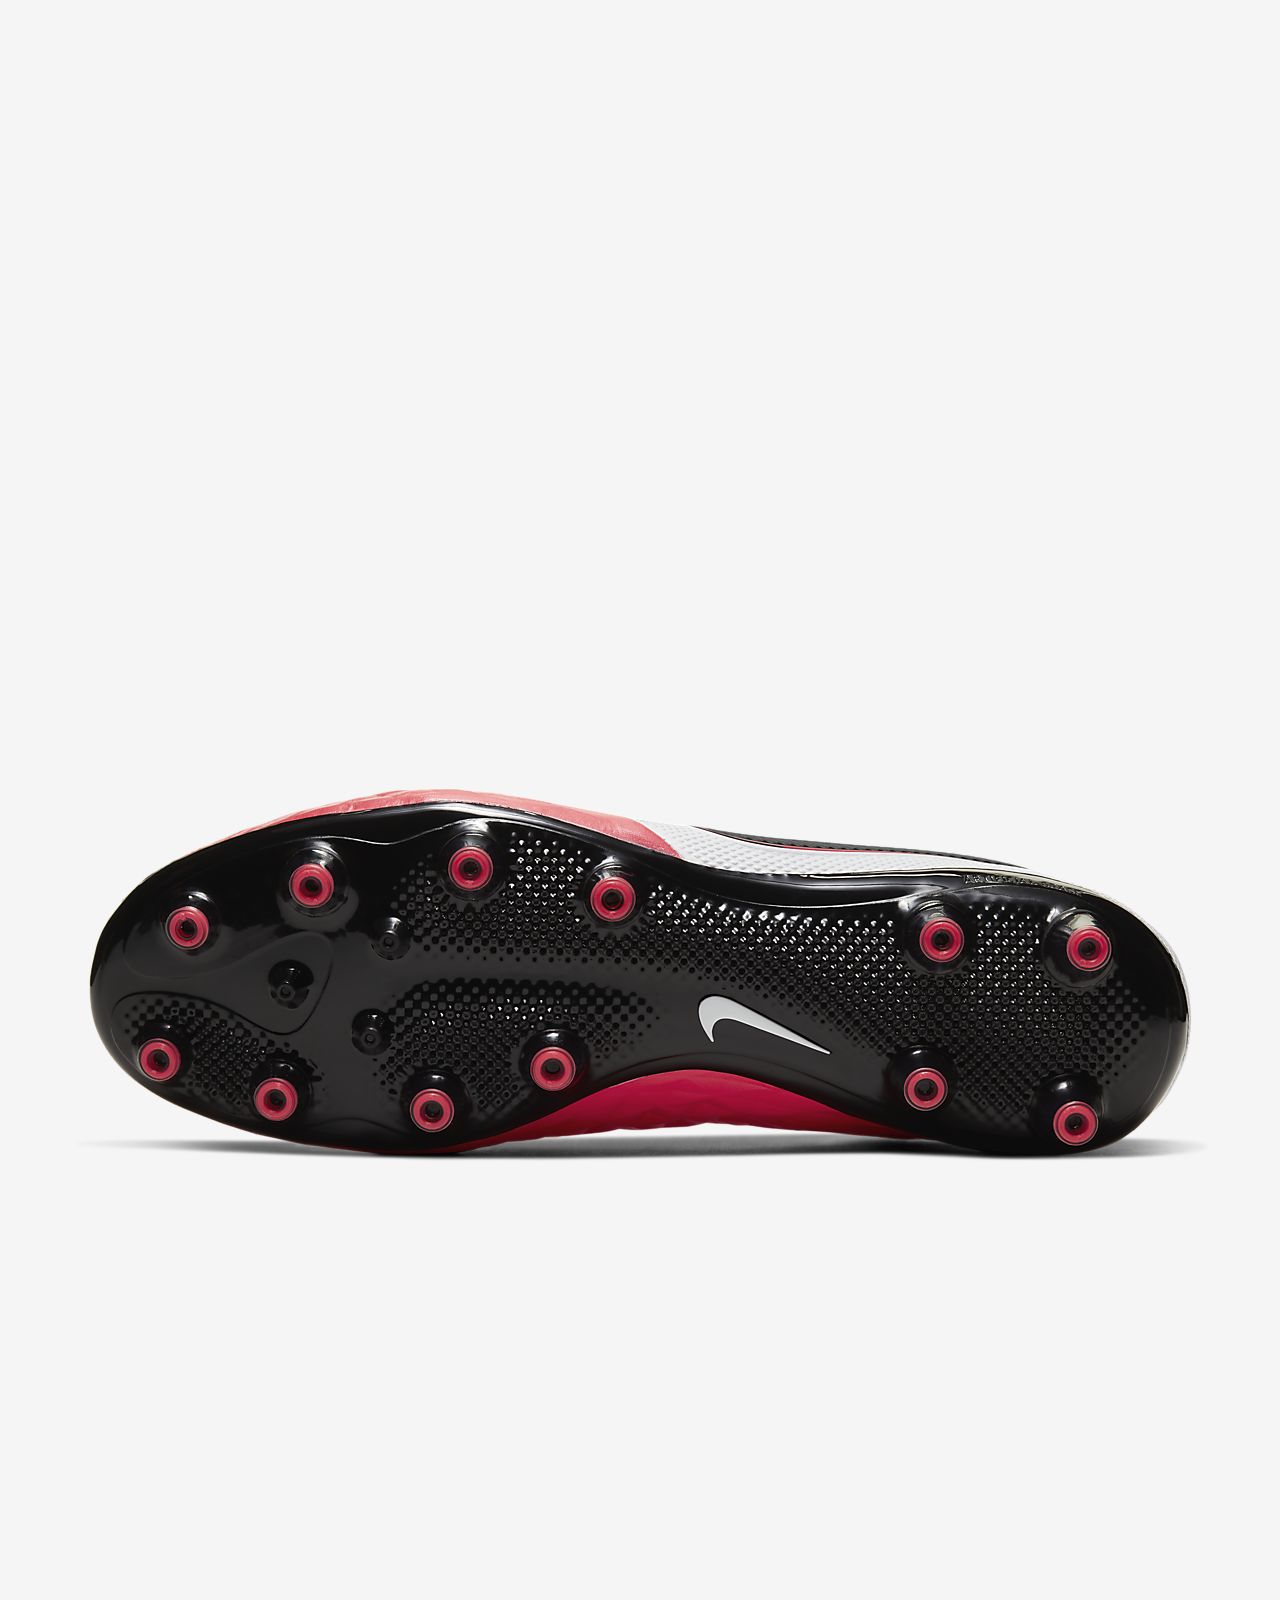 Check Out Nike Weather Legend VIII DF FG Red Black White